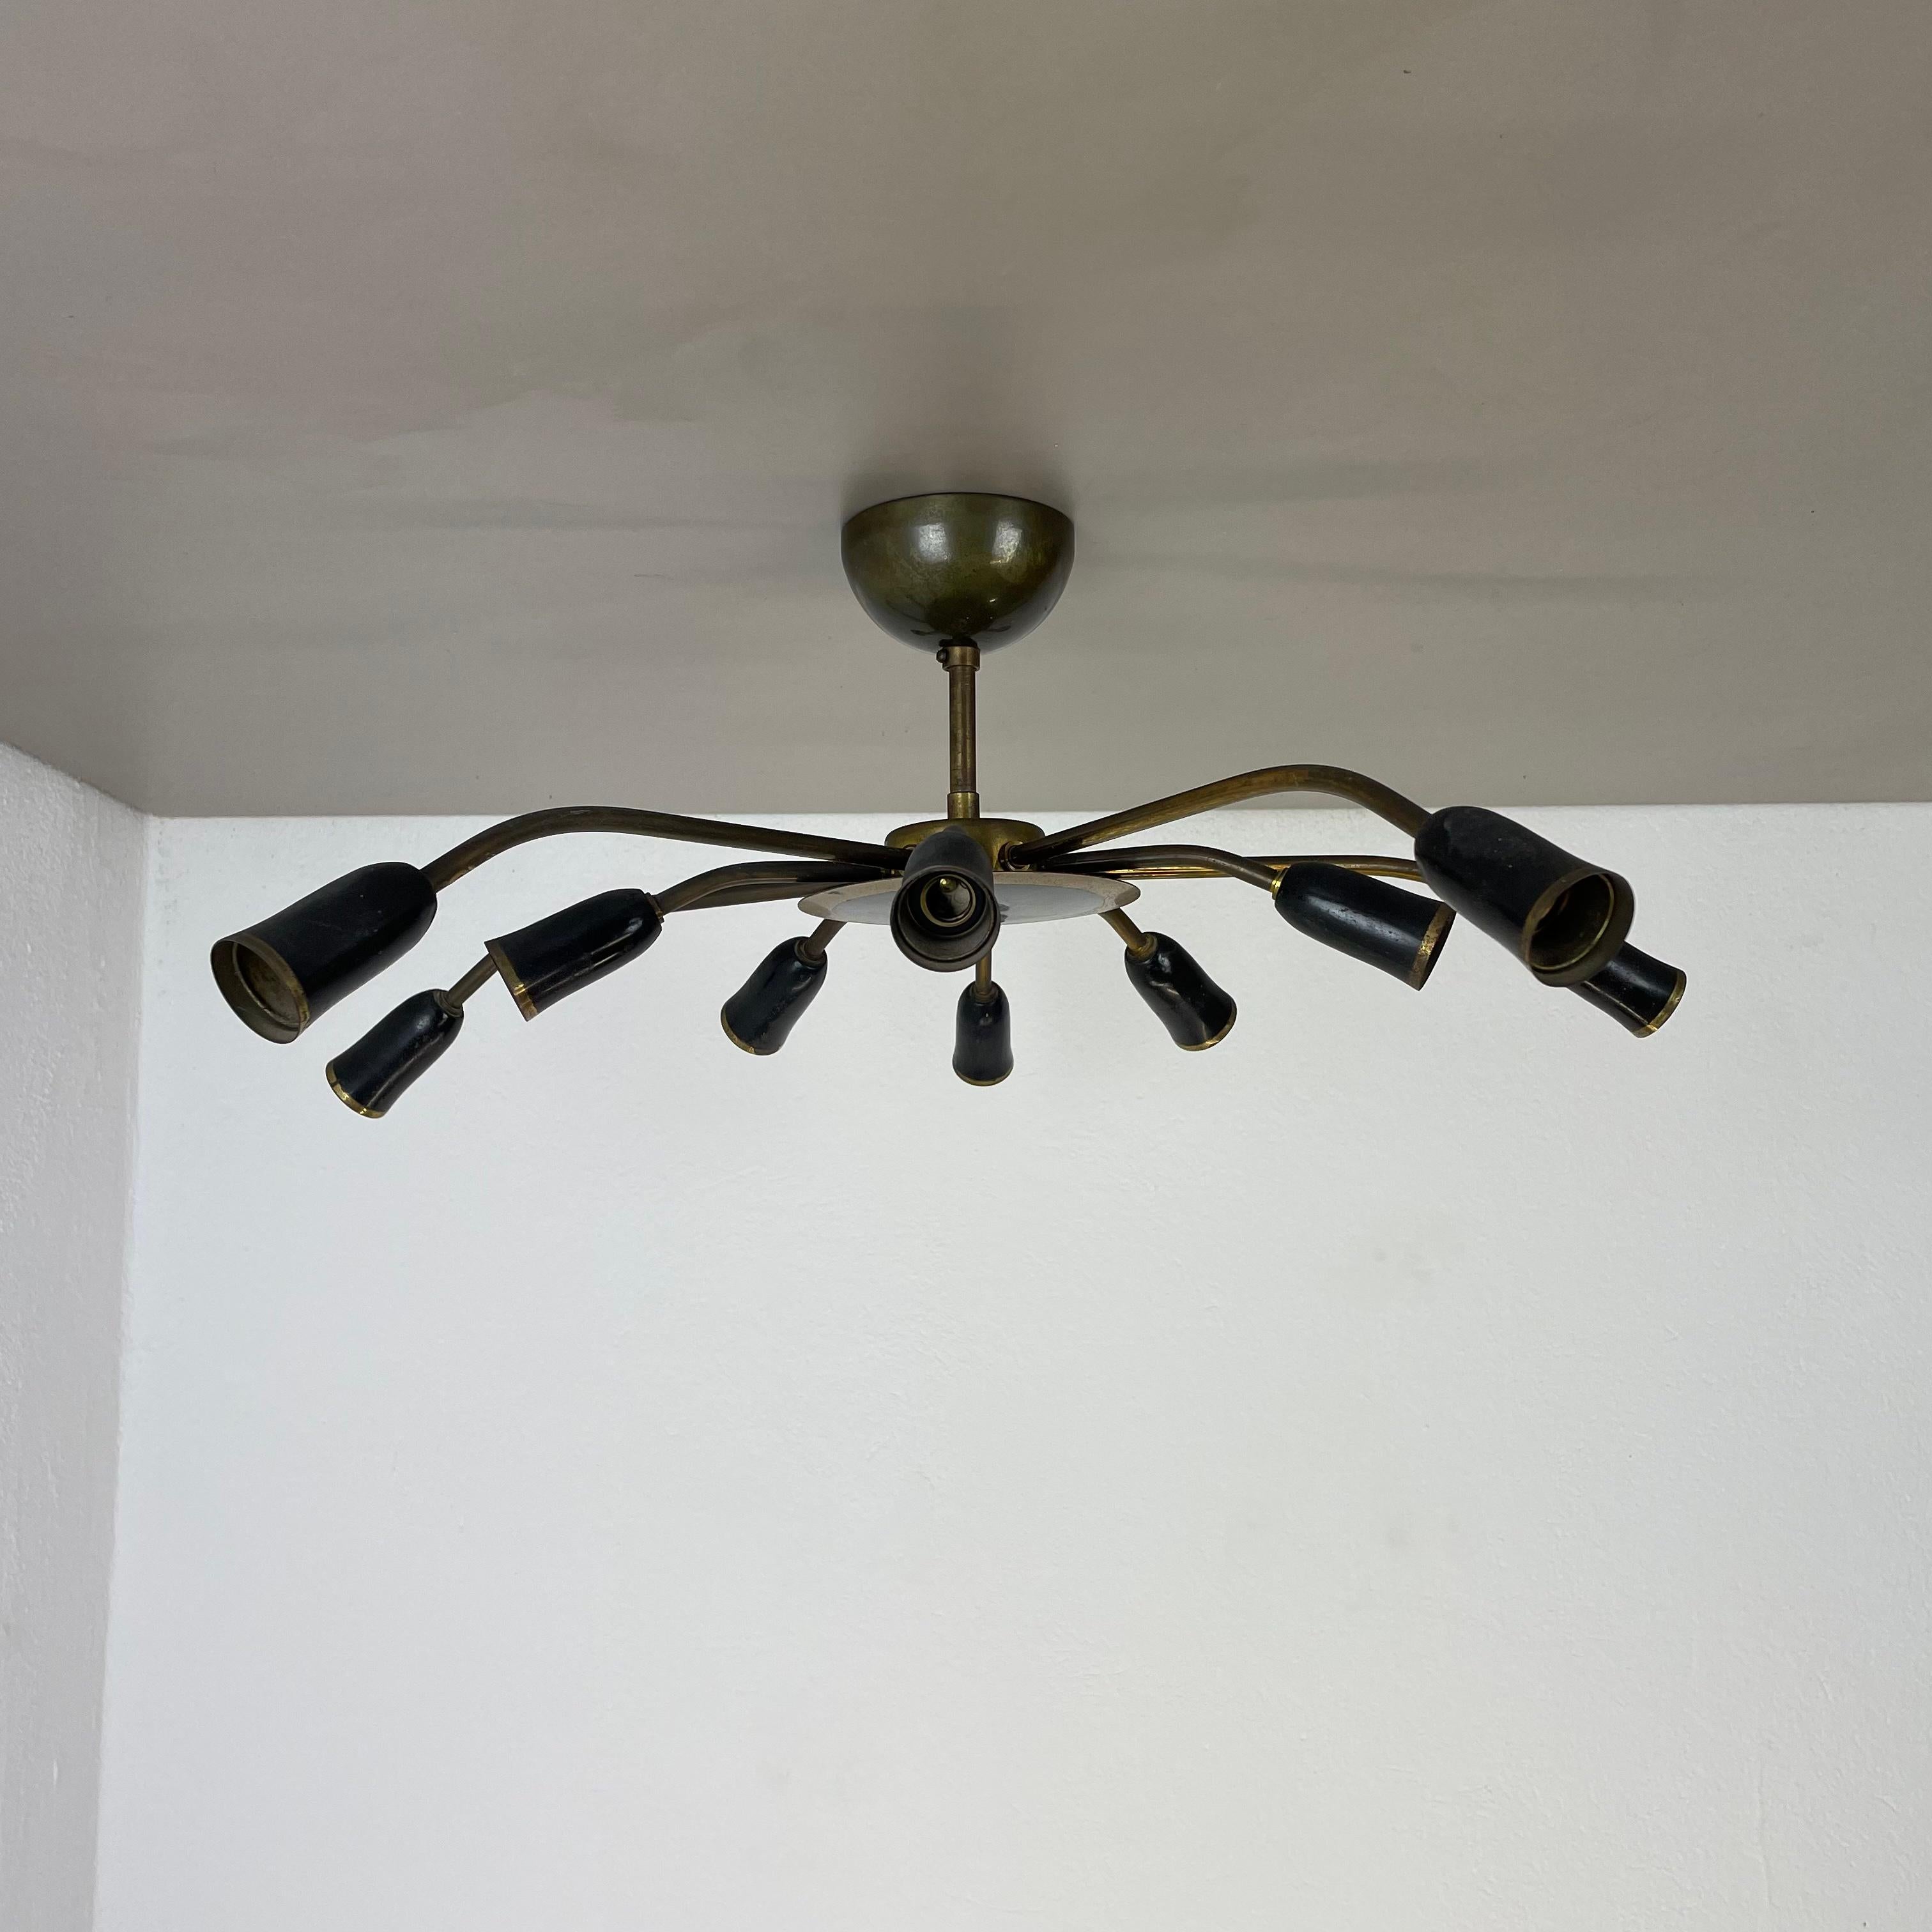 1950s style ceiling lights